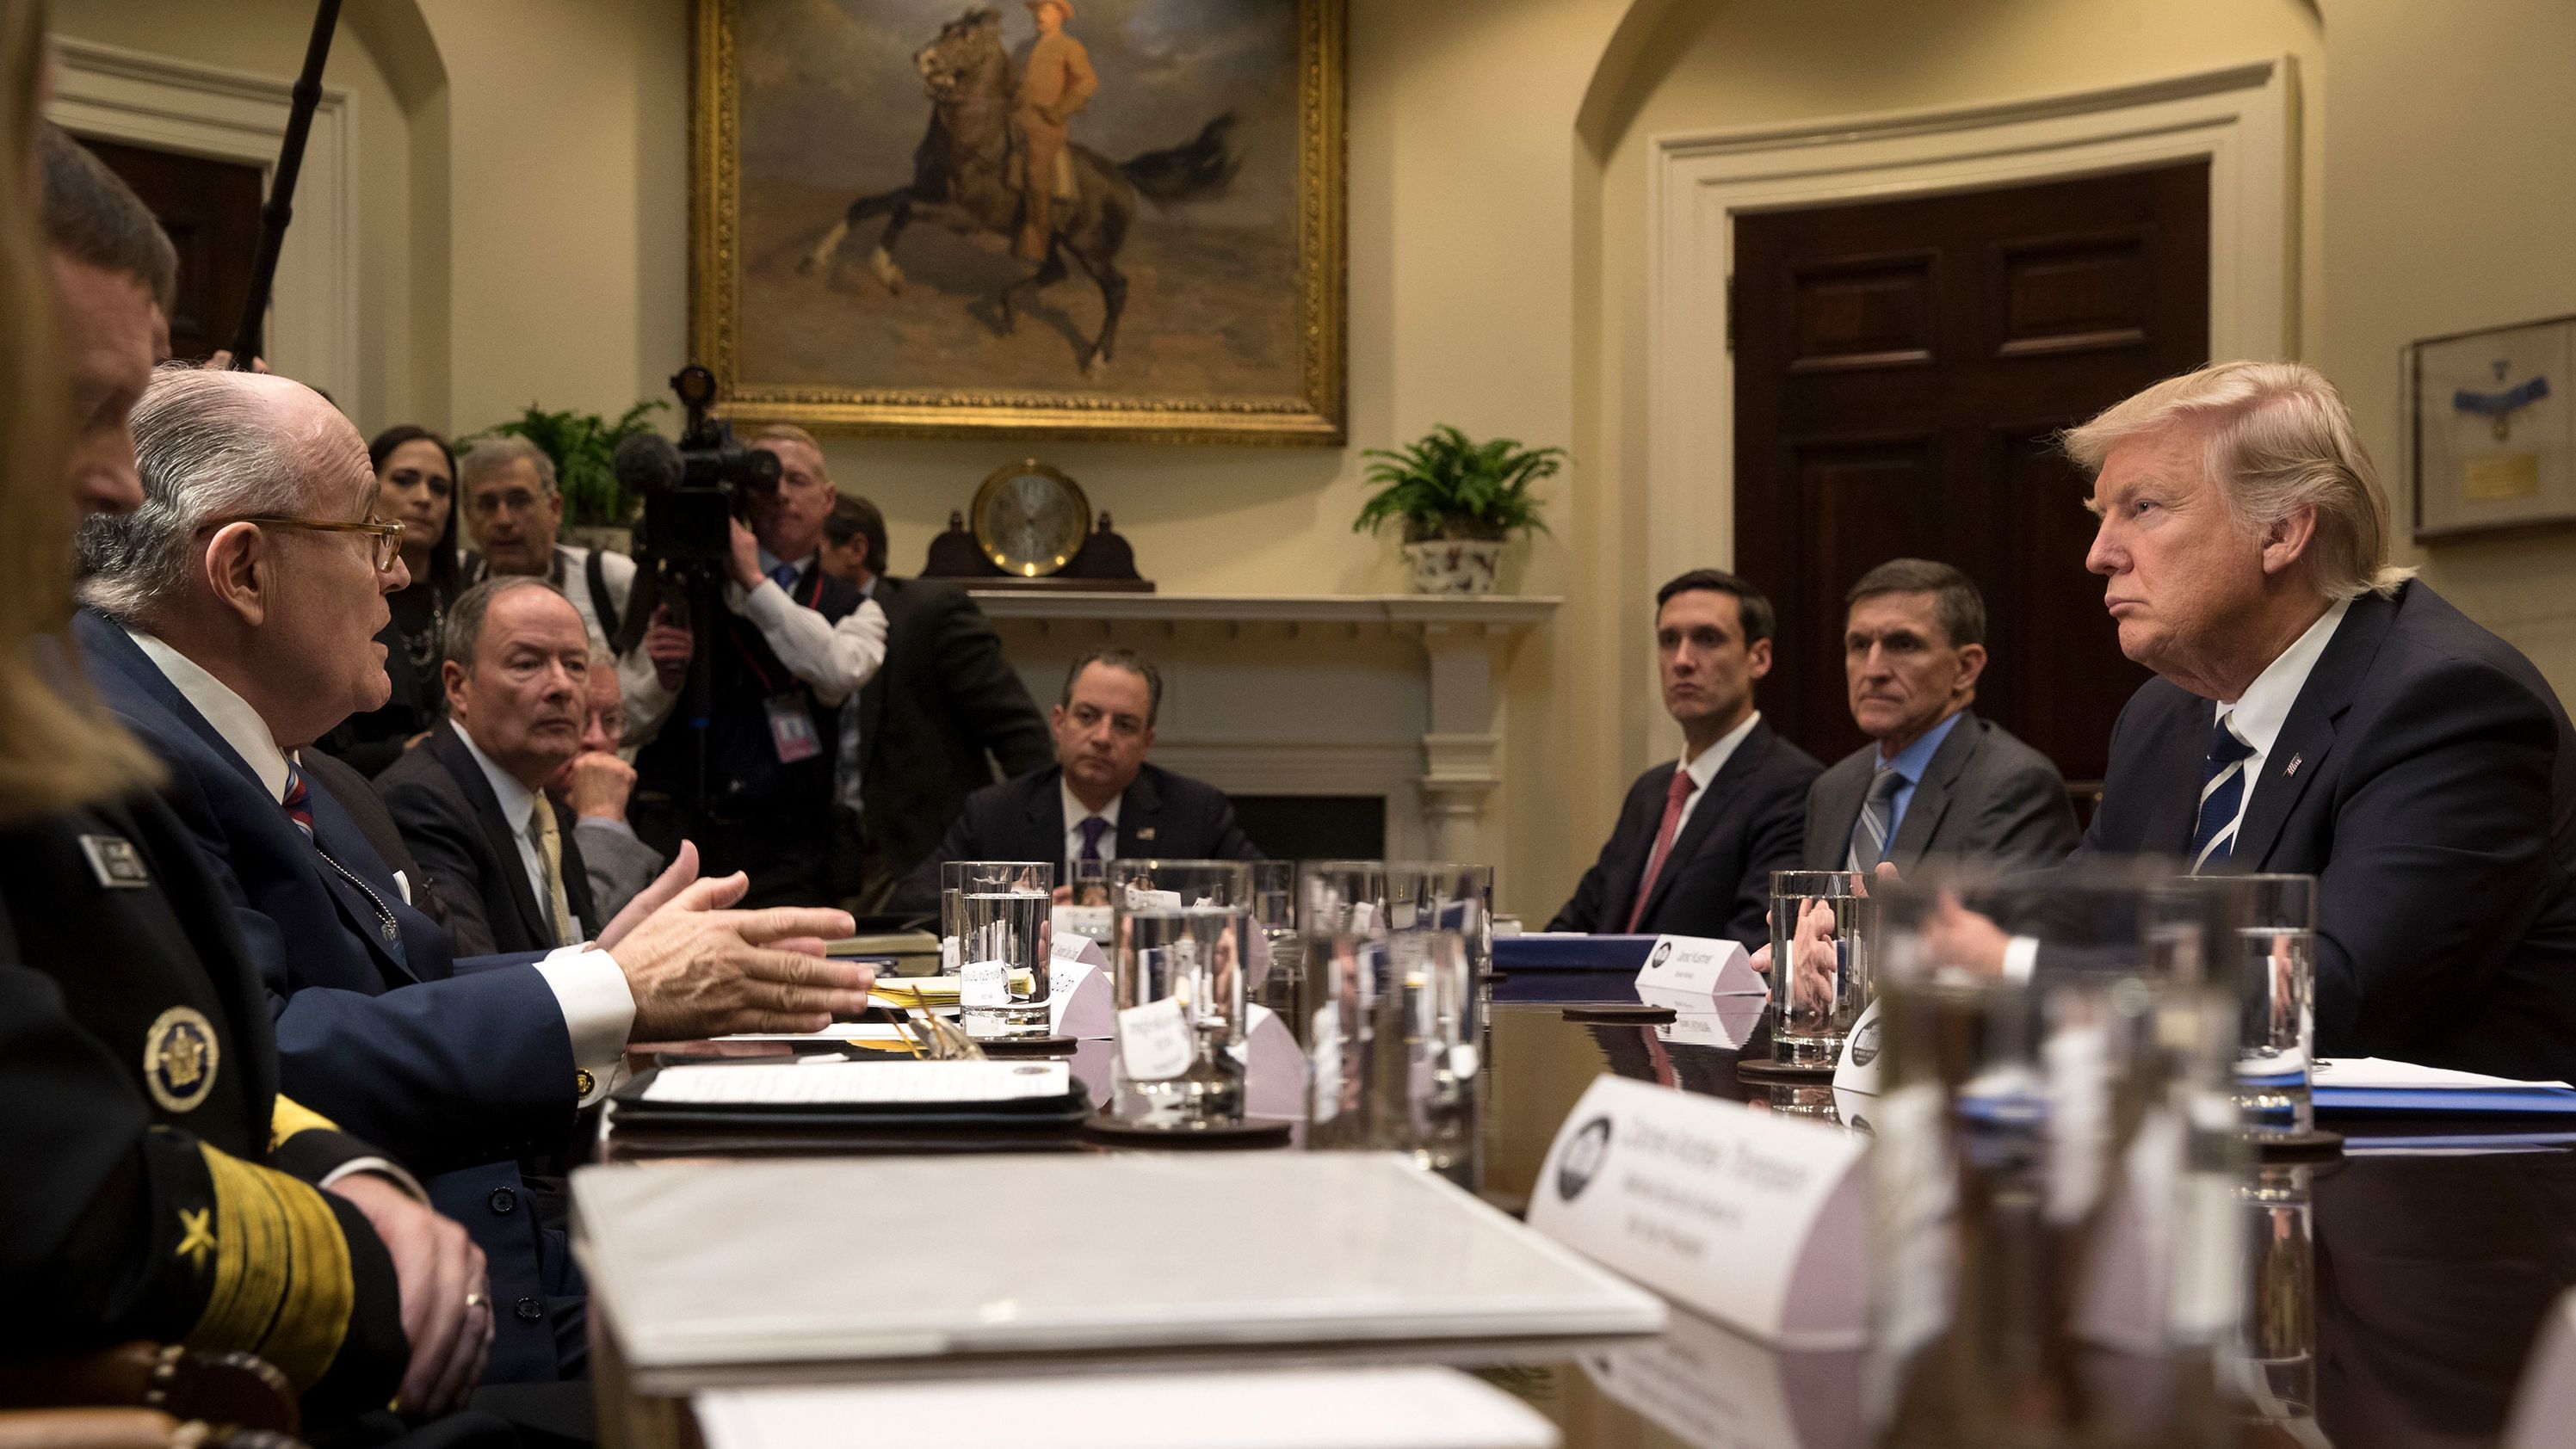 Giuliani briefs Trump about cybersecurity after Trump was inaugurated in January 2017. Giuliani joined Trump's transition team as an adviser "concerning private sector cybersecurity problems and emerging solutions developing in the private sector." In April 2018, Giuliani joined Trump's personal legal team.